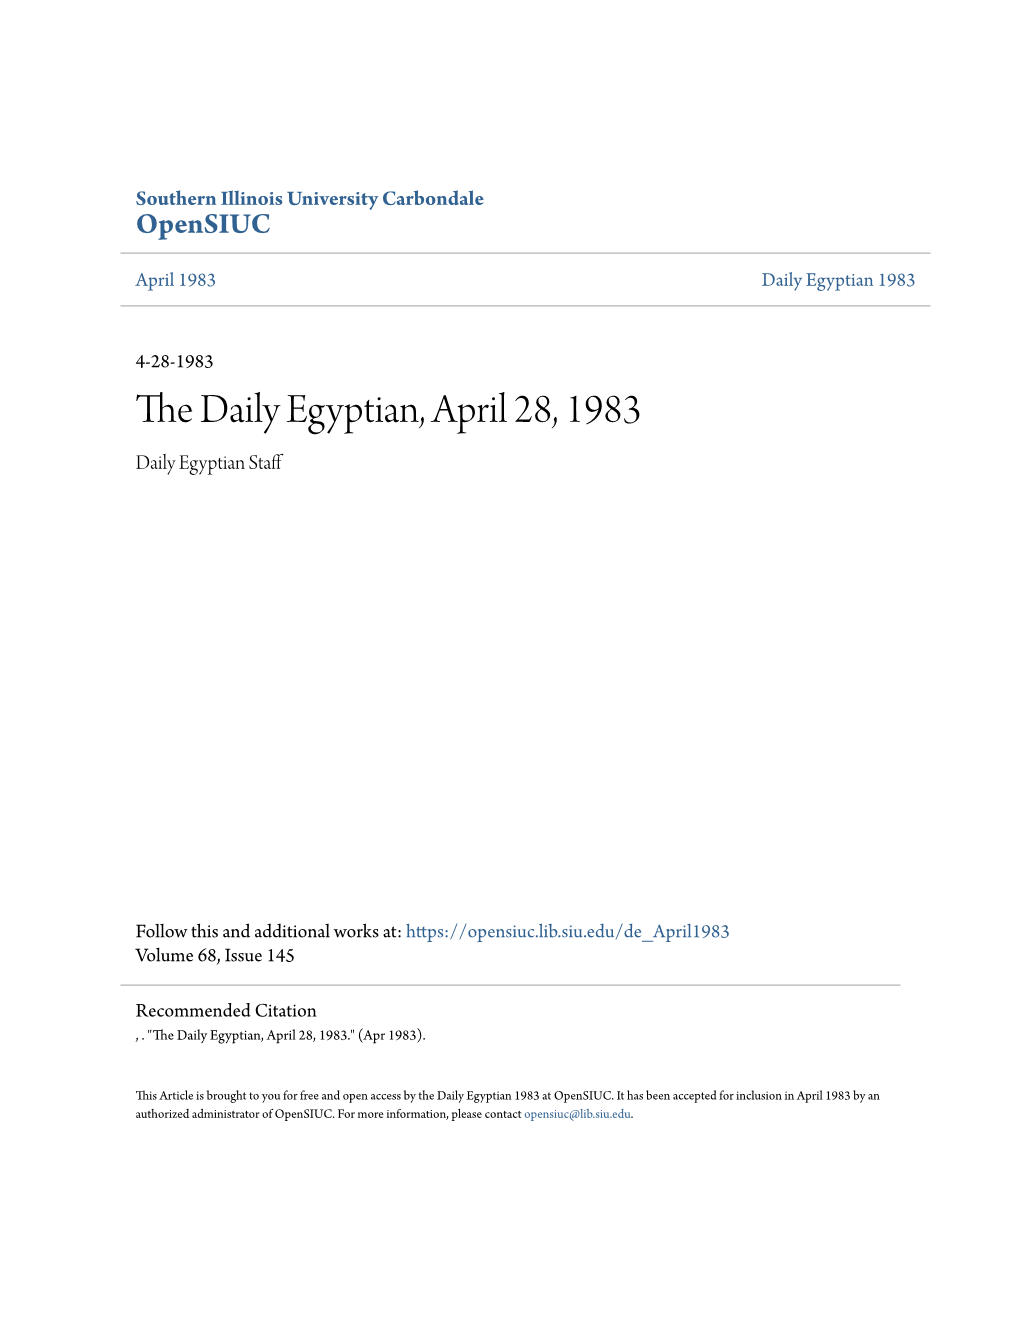 The Daily Egyptian, April 28, 1983